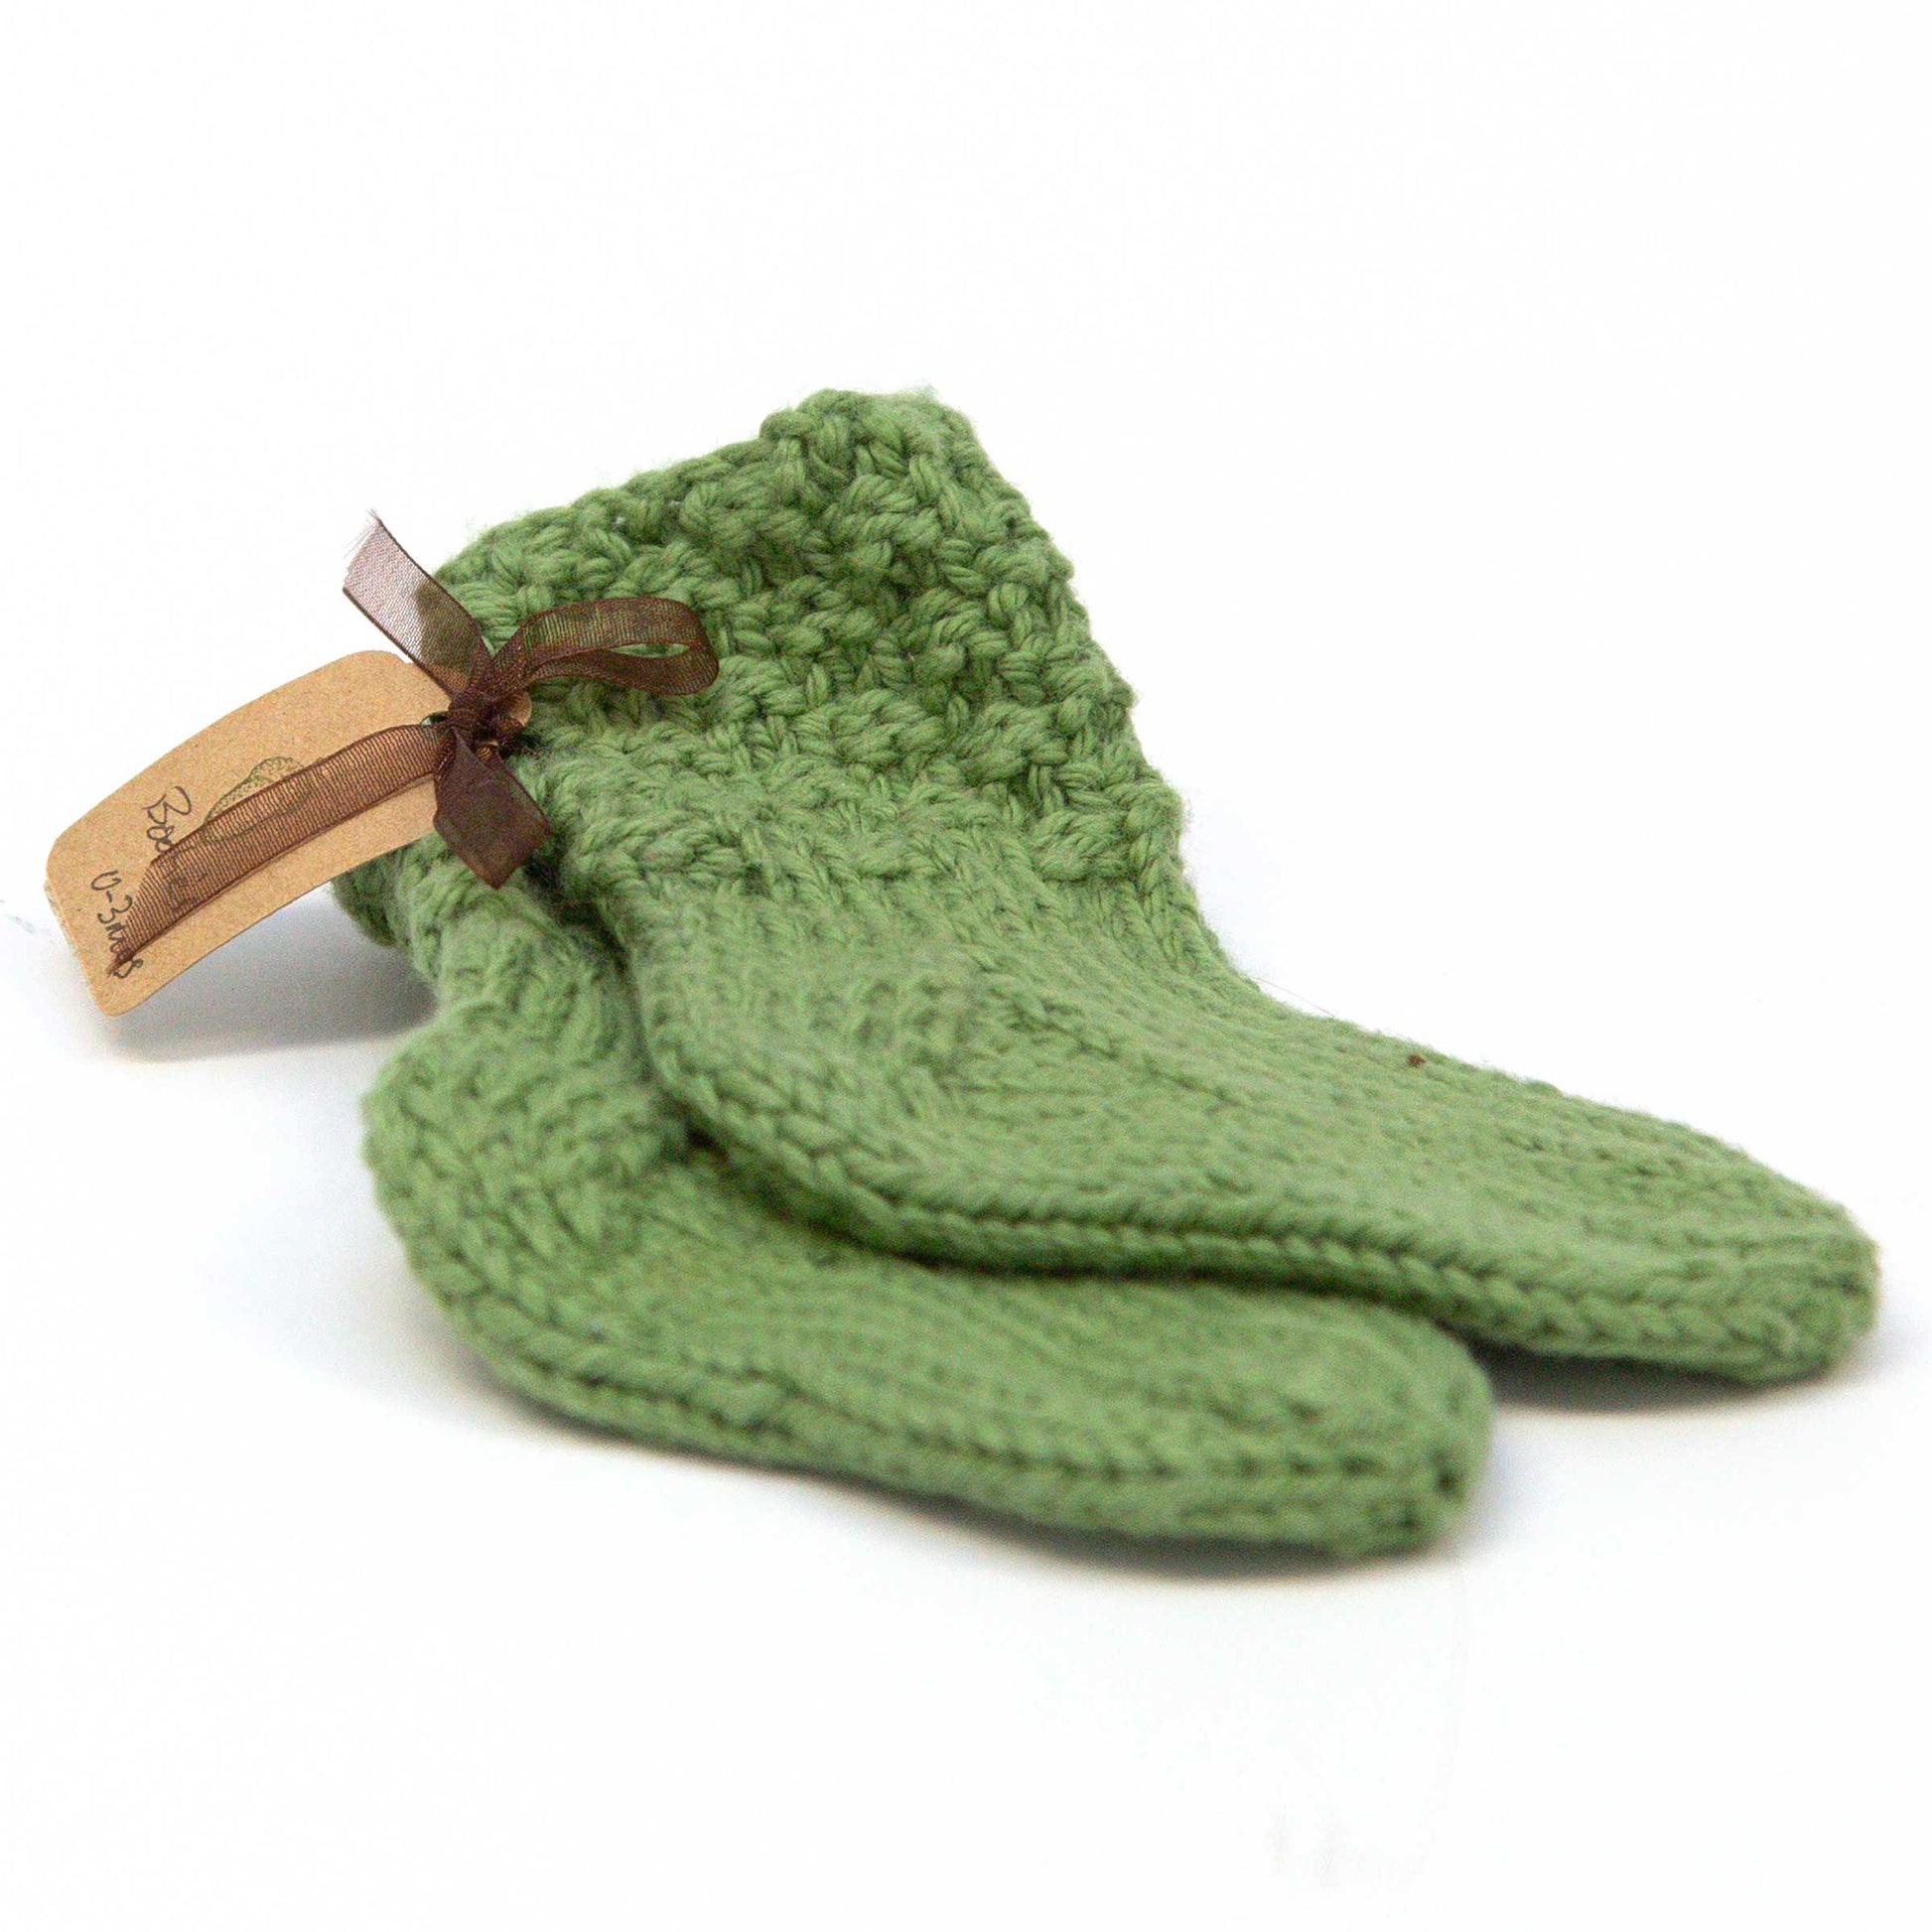 Baby Booties, 0-3 months, Hand Knit, Cotton, No Seam, Washable, Green